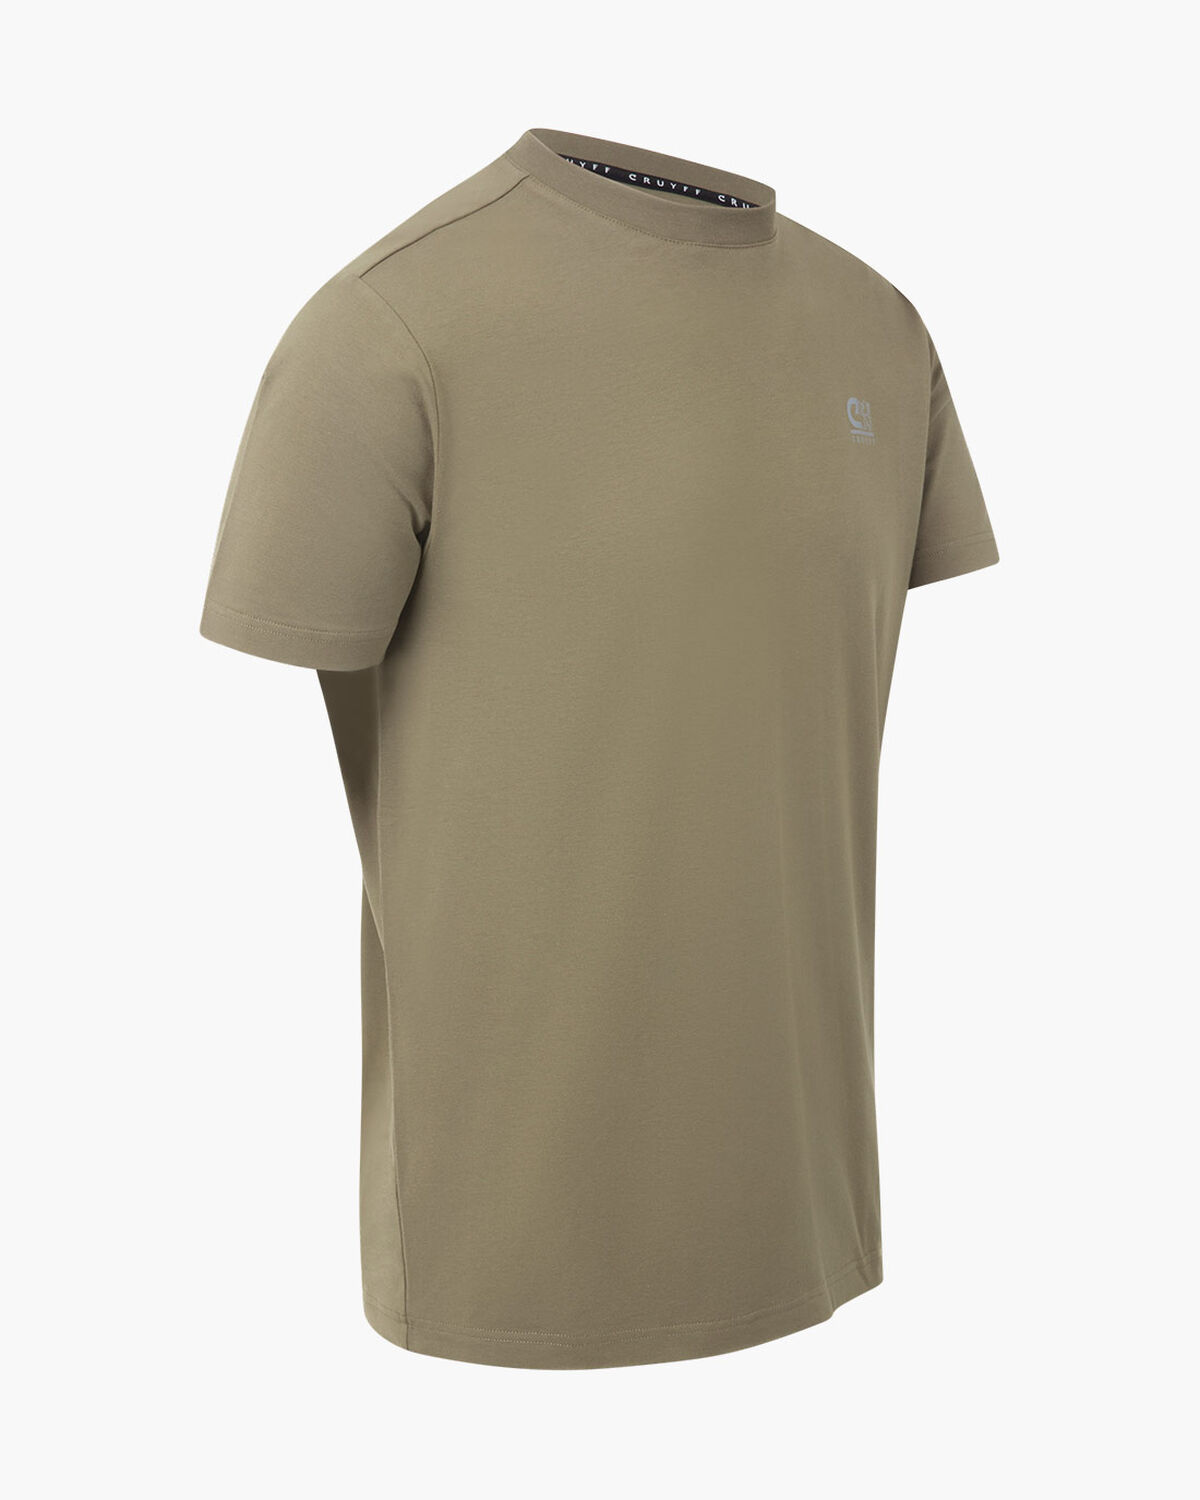 Soothe Tee, Army green, hi-res